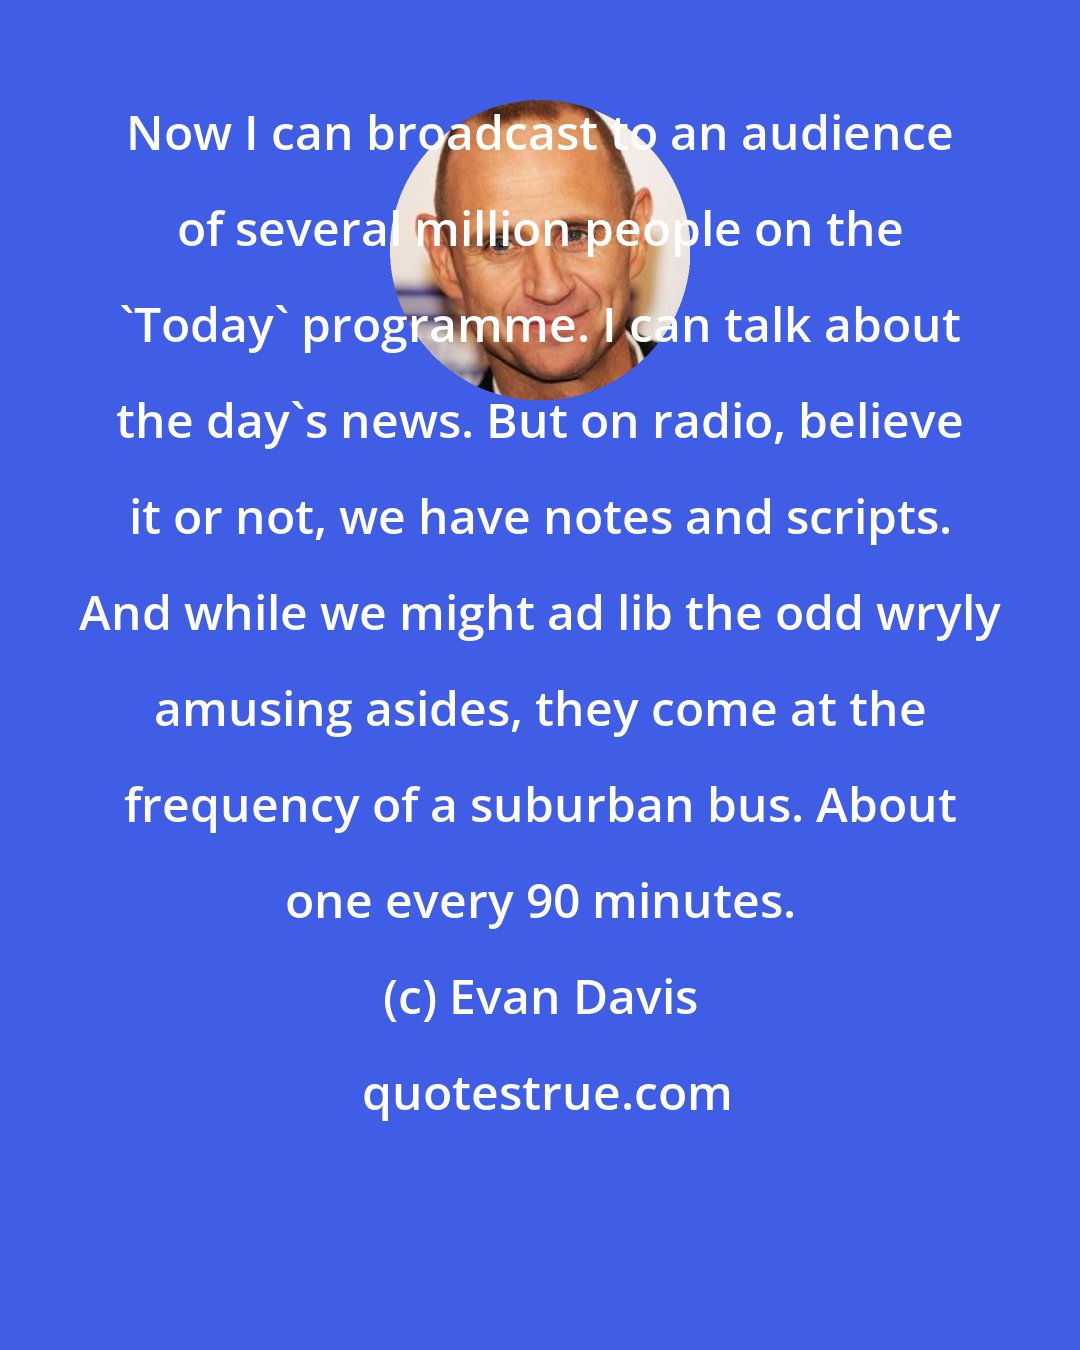 Evan Davis: Now I can broadcast to an audience of several million people on the 'Today' programme. I can talk about the day's news. But on radio, believe it or not, we have notes and scripts. And while we might ad lib the odd wryly amusing asides, they come at the frequency of a suburban bus. About one every 90 minutes.